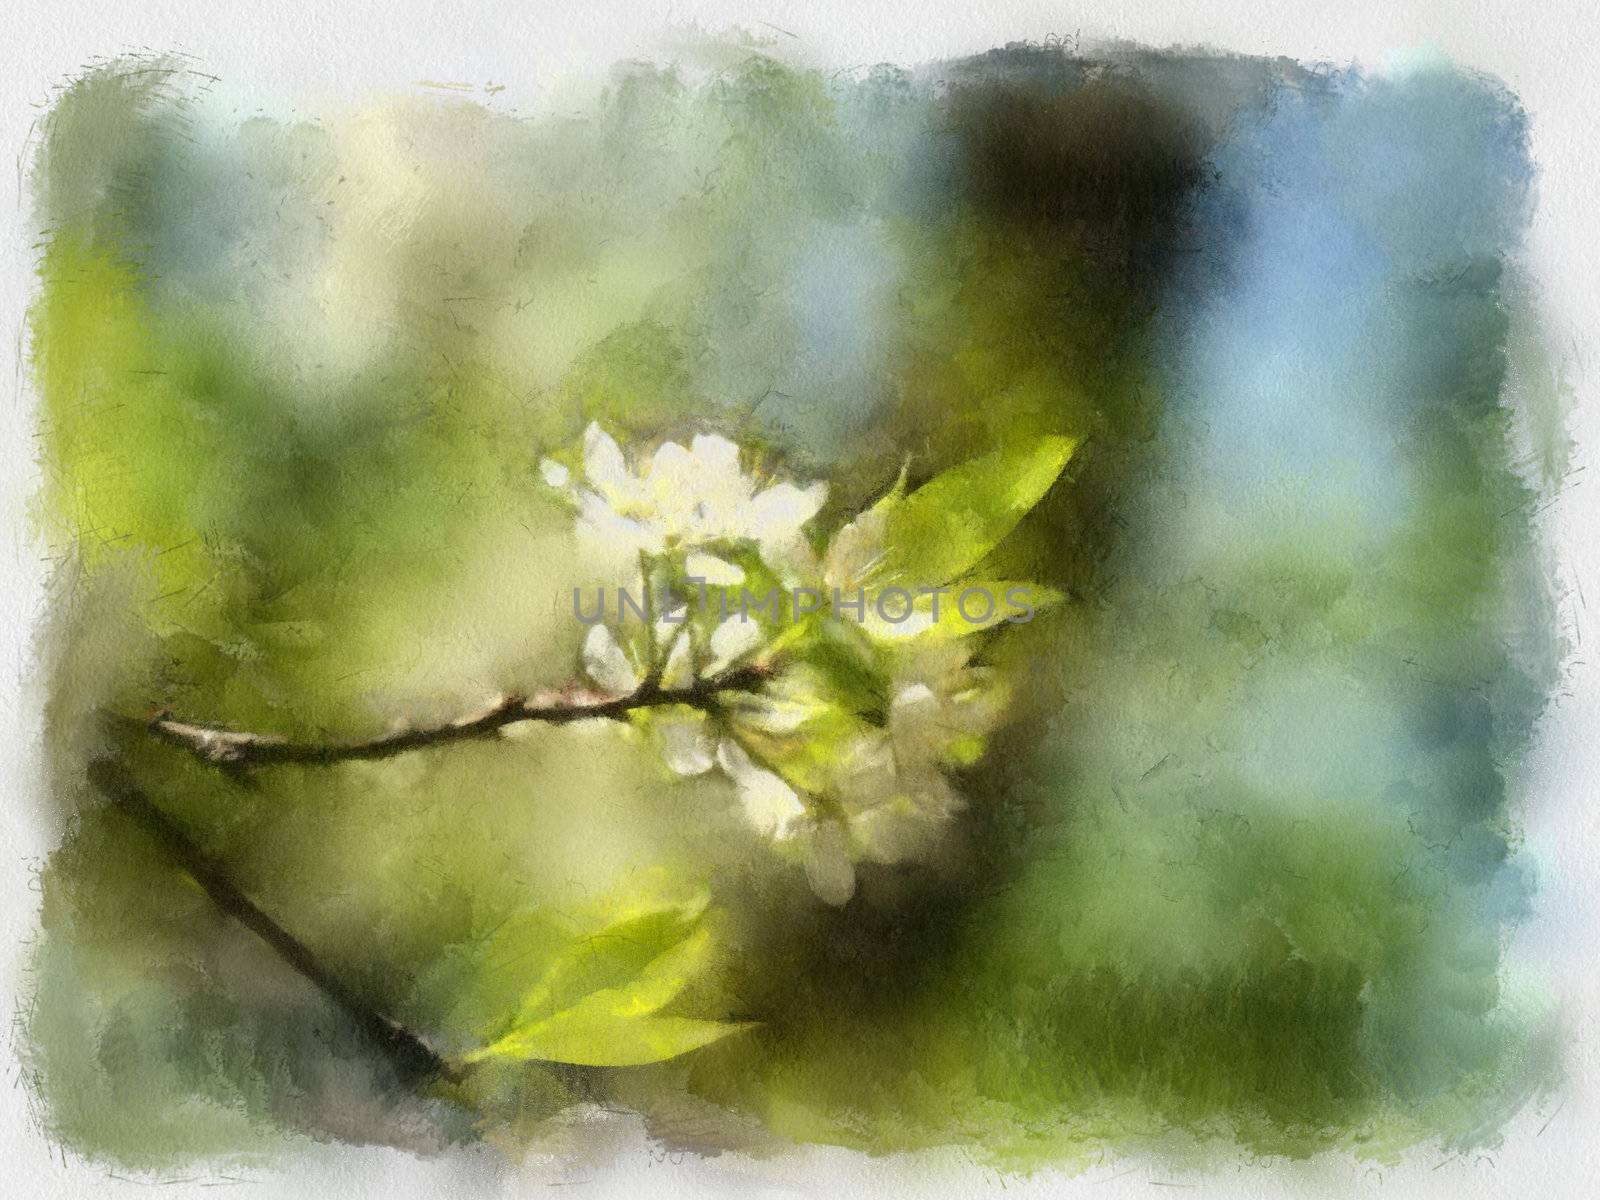 A watercolor picture of a branch of apple tree